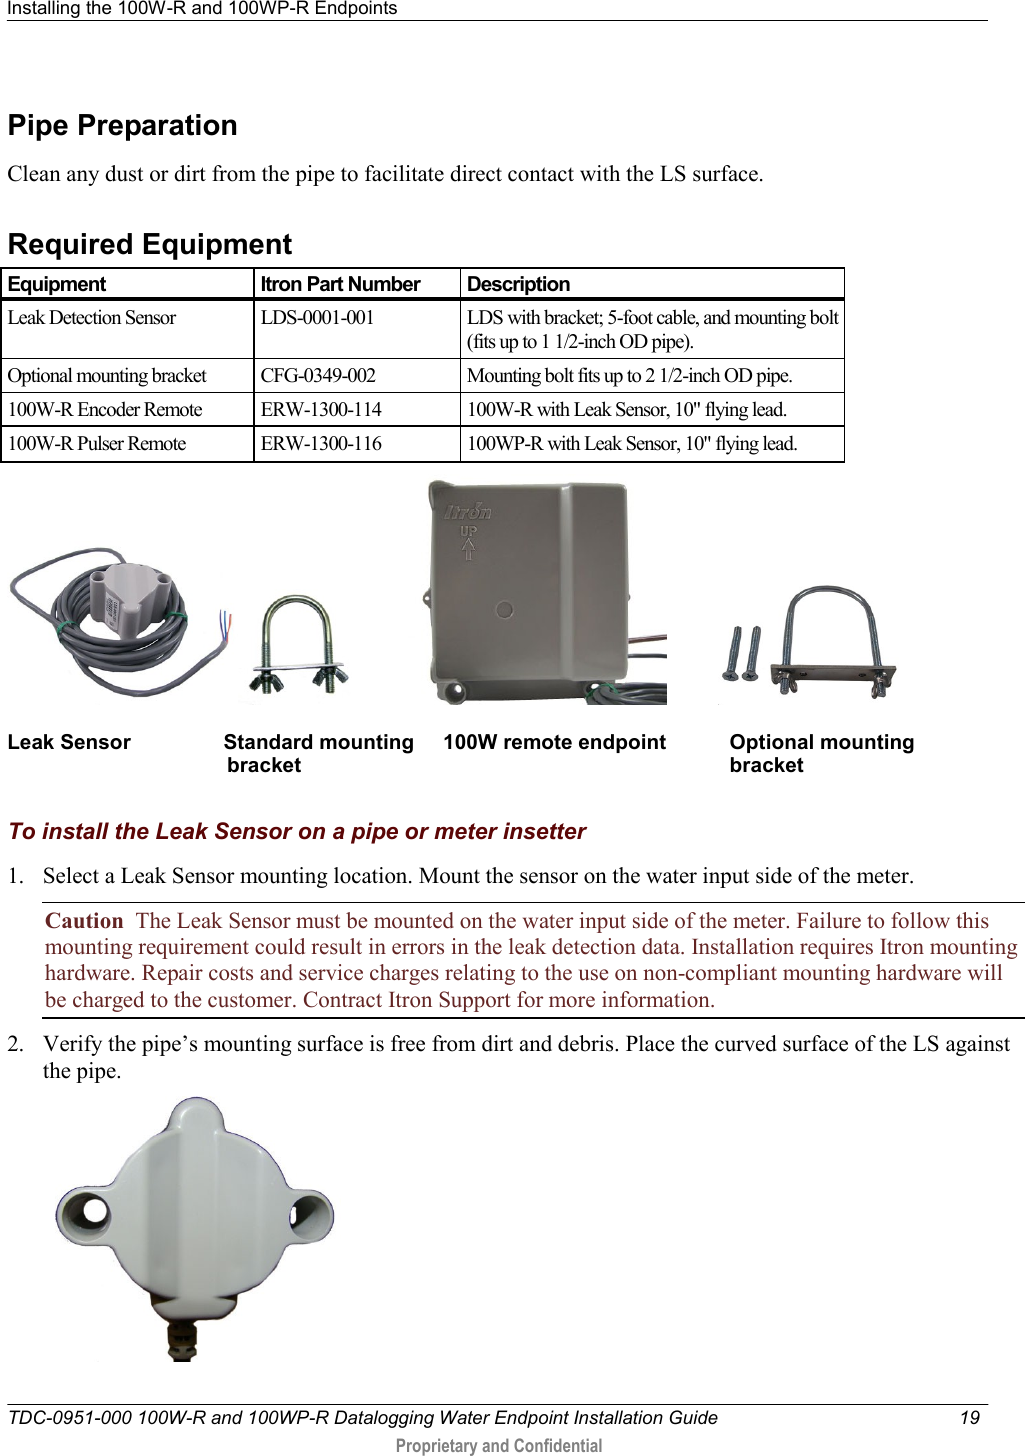 Installing the 100W-R and 100WP-R Endpoints   TDC-0951-000 100W-R and 100WP-R Datalogging Water Endpoint Installation Guide  19   Proprietary and Confidential     Pipe Preparation Clean any dust or dirt from the pipe to facilitate direct contact with the LS surface.  Required Equipment Equipment Itron Part Number Description Leak Detection Sensor LDS-0001-001 LDS with bracket; 5-foot cable, and mounting bolt (fits up to 1 1/2-inch OD pipe). Optional mounting bracket CFG-0349-002 Mounting bolt fits up to 2 1/2-inch OD pipe. 100W-R Encoder Remote  ERW-1300-114 100W-R with Leak Sensor, 10&quot; flying lead.  100W-R Pulser Remote  ERW-1300-116 100WP-R with Leak Sensor, 10&quot; flying lead.                       Leak Sensor                Standard mounting     100W remote endpoint           Optional mounting                                       bracket                                                                          bracket  To install the Leak Sensor on a pipe or meter insetter 1. Select a Leak Sensor mounting location. Mount the sensor on the water input side of the meter. Caution  The Leak Sensor must be mounted on the water input side of the meter. Failure to follow this mounting requirement could result in errors in the leak detection data. Installation requires Itron mounting hardware. Repair costs and service charges relating to the use on non-compliant mounting hardware will be charged to the customer. Contract Itron Support for more information. 2. Verify the pipe’s mounting surface is free from dirt and debris. Place the curved surface of the LS against the pipe.  